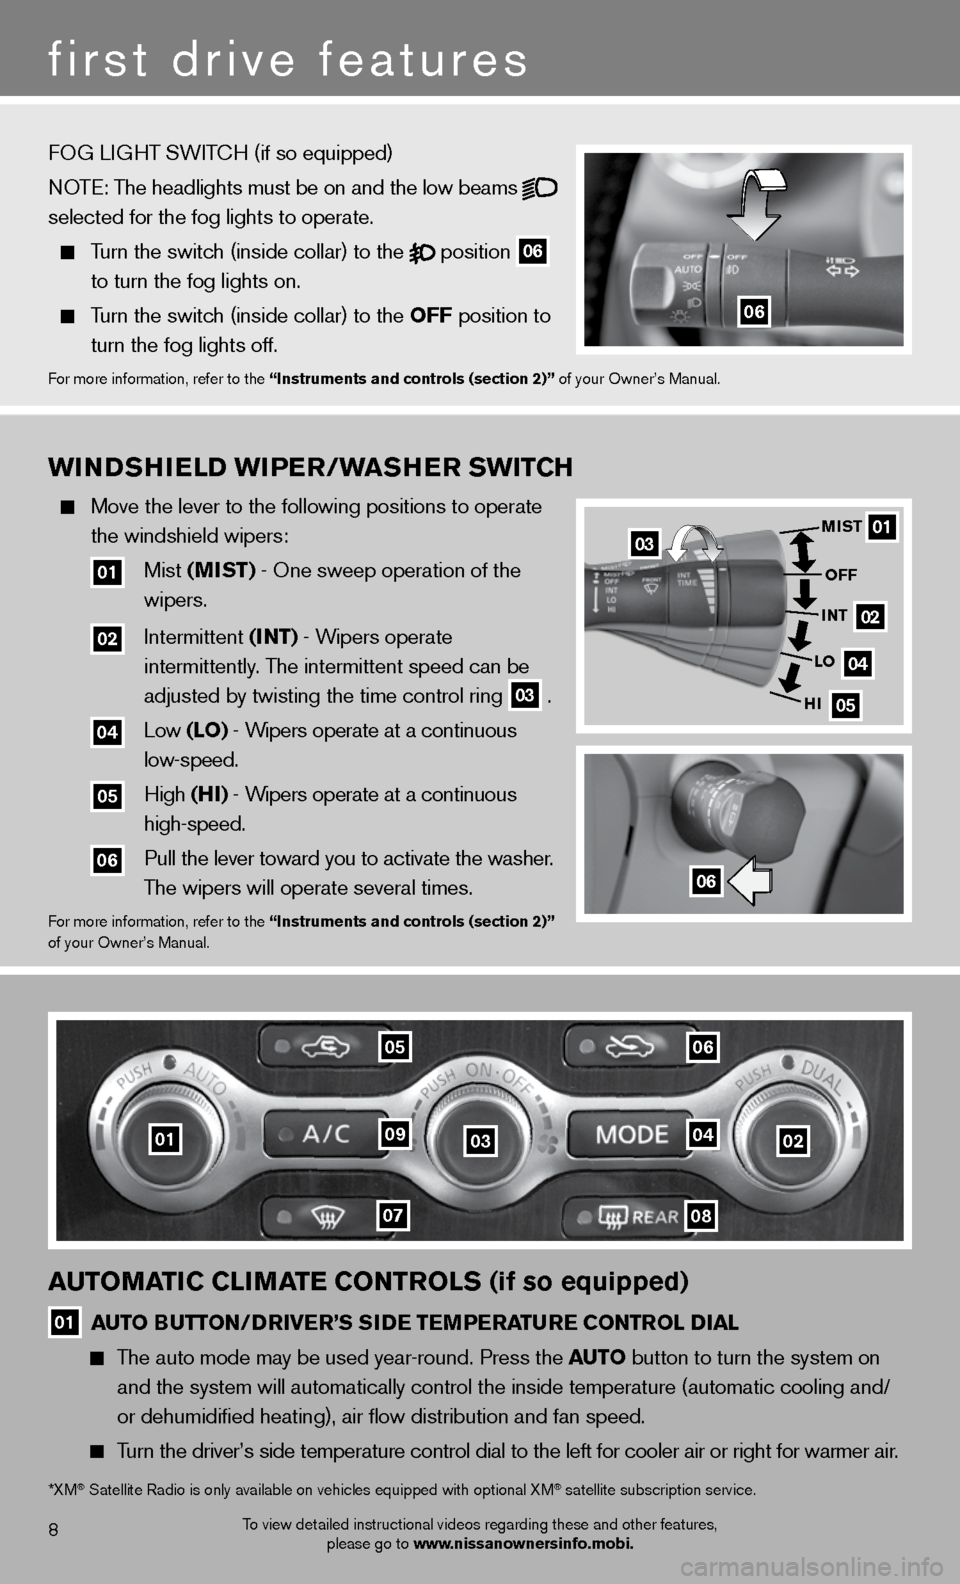 NISSAN MAXIMA 2012 A35 / 7.G Quick Reference Guide WinDshiEl D WiPEr/W ashEr sW itCh
   Move the lever to the following positions to operate 
    the windshield wipers:   
  
01 Mist  (mist) - One sweep operation of the   
     wipers.  
  
02 intermi